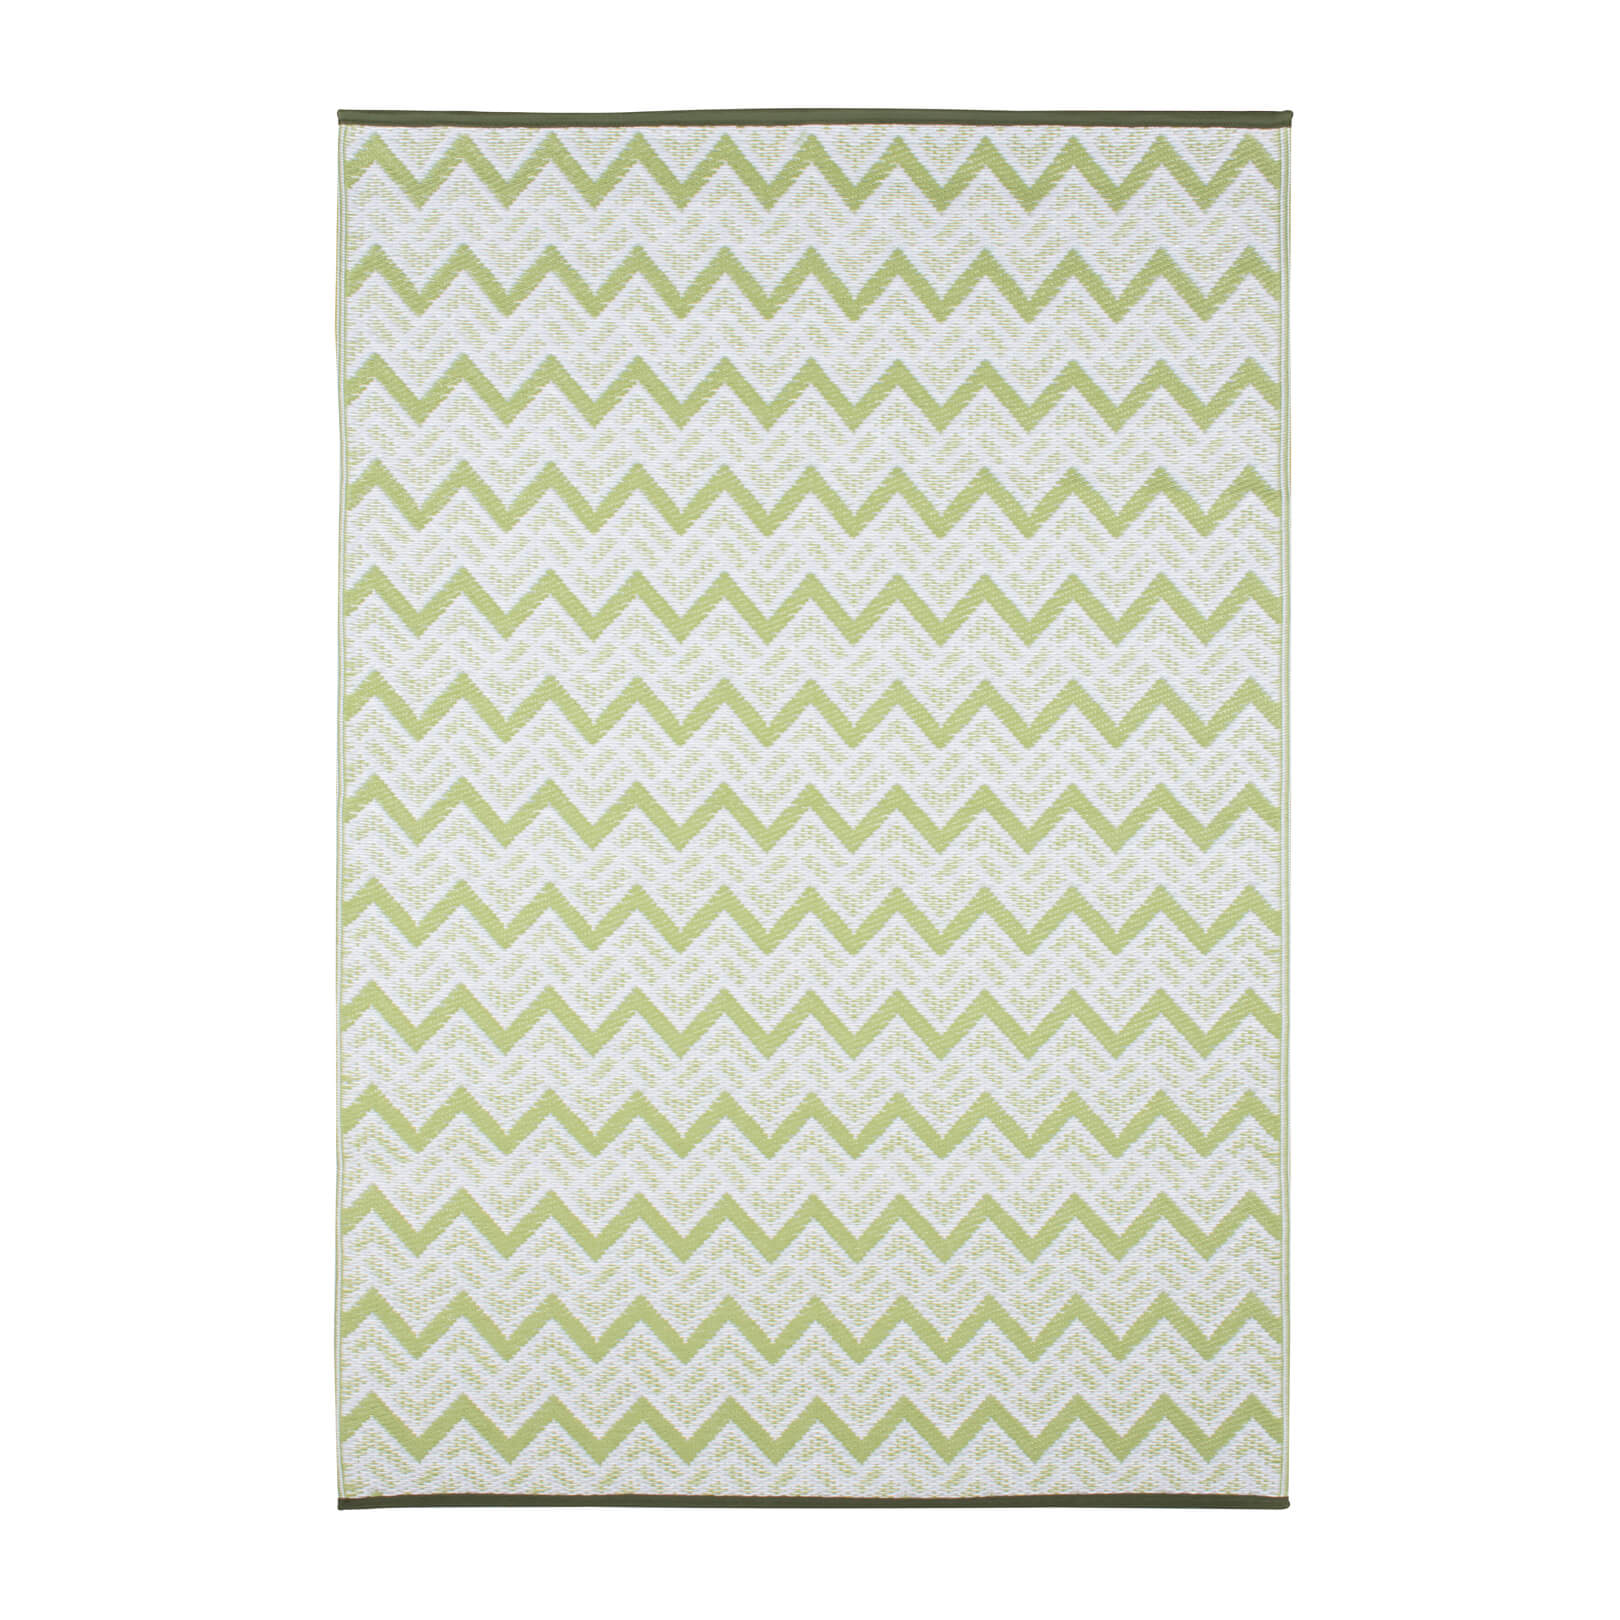 Herbam Outdoor Recycled Plastic Rug (Light green/Grey)